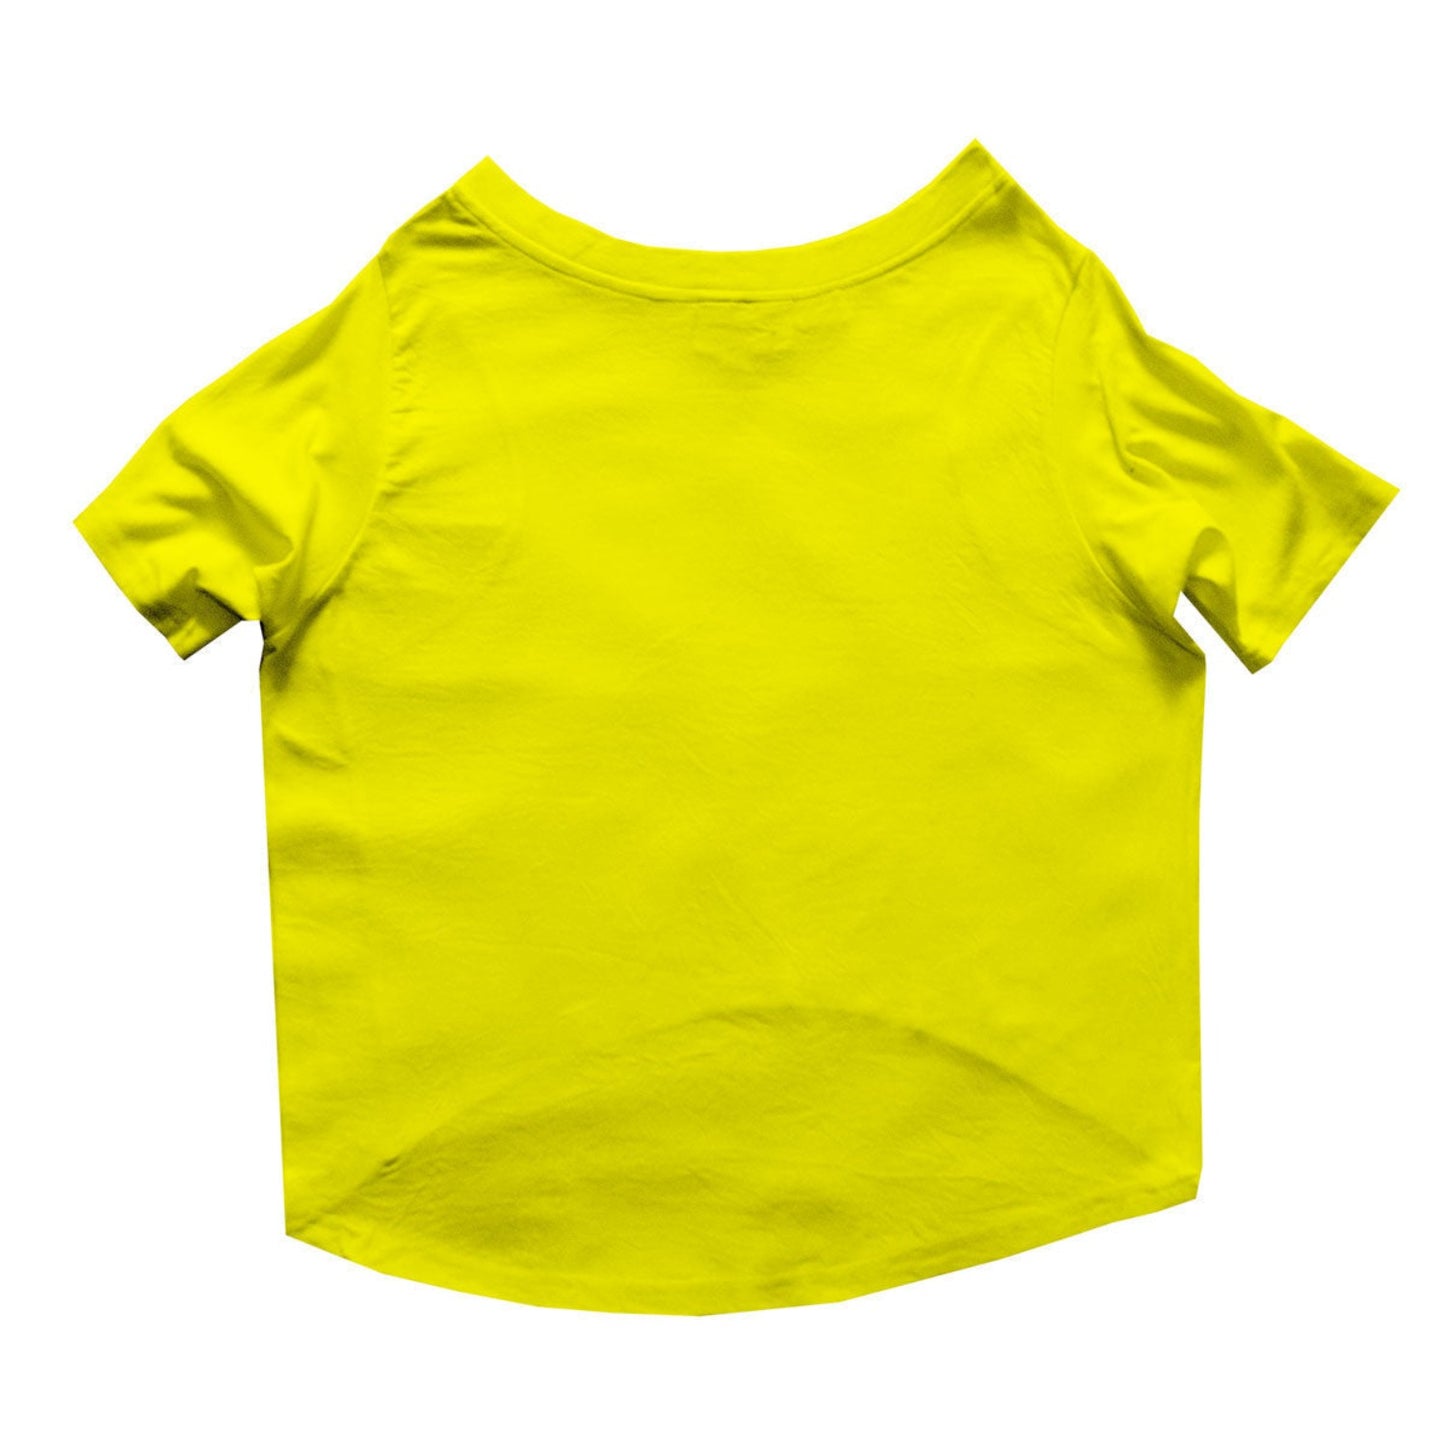 Ruse / Yellow Ruse Basic Crew Neck "Let's Party" Printed Half Sleeves Dog Tee20